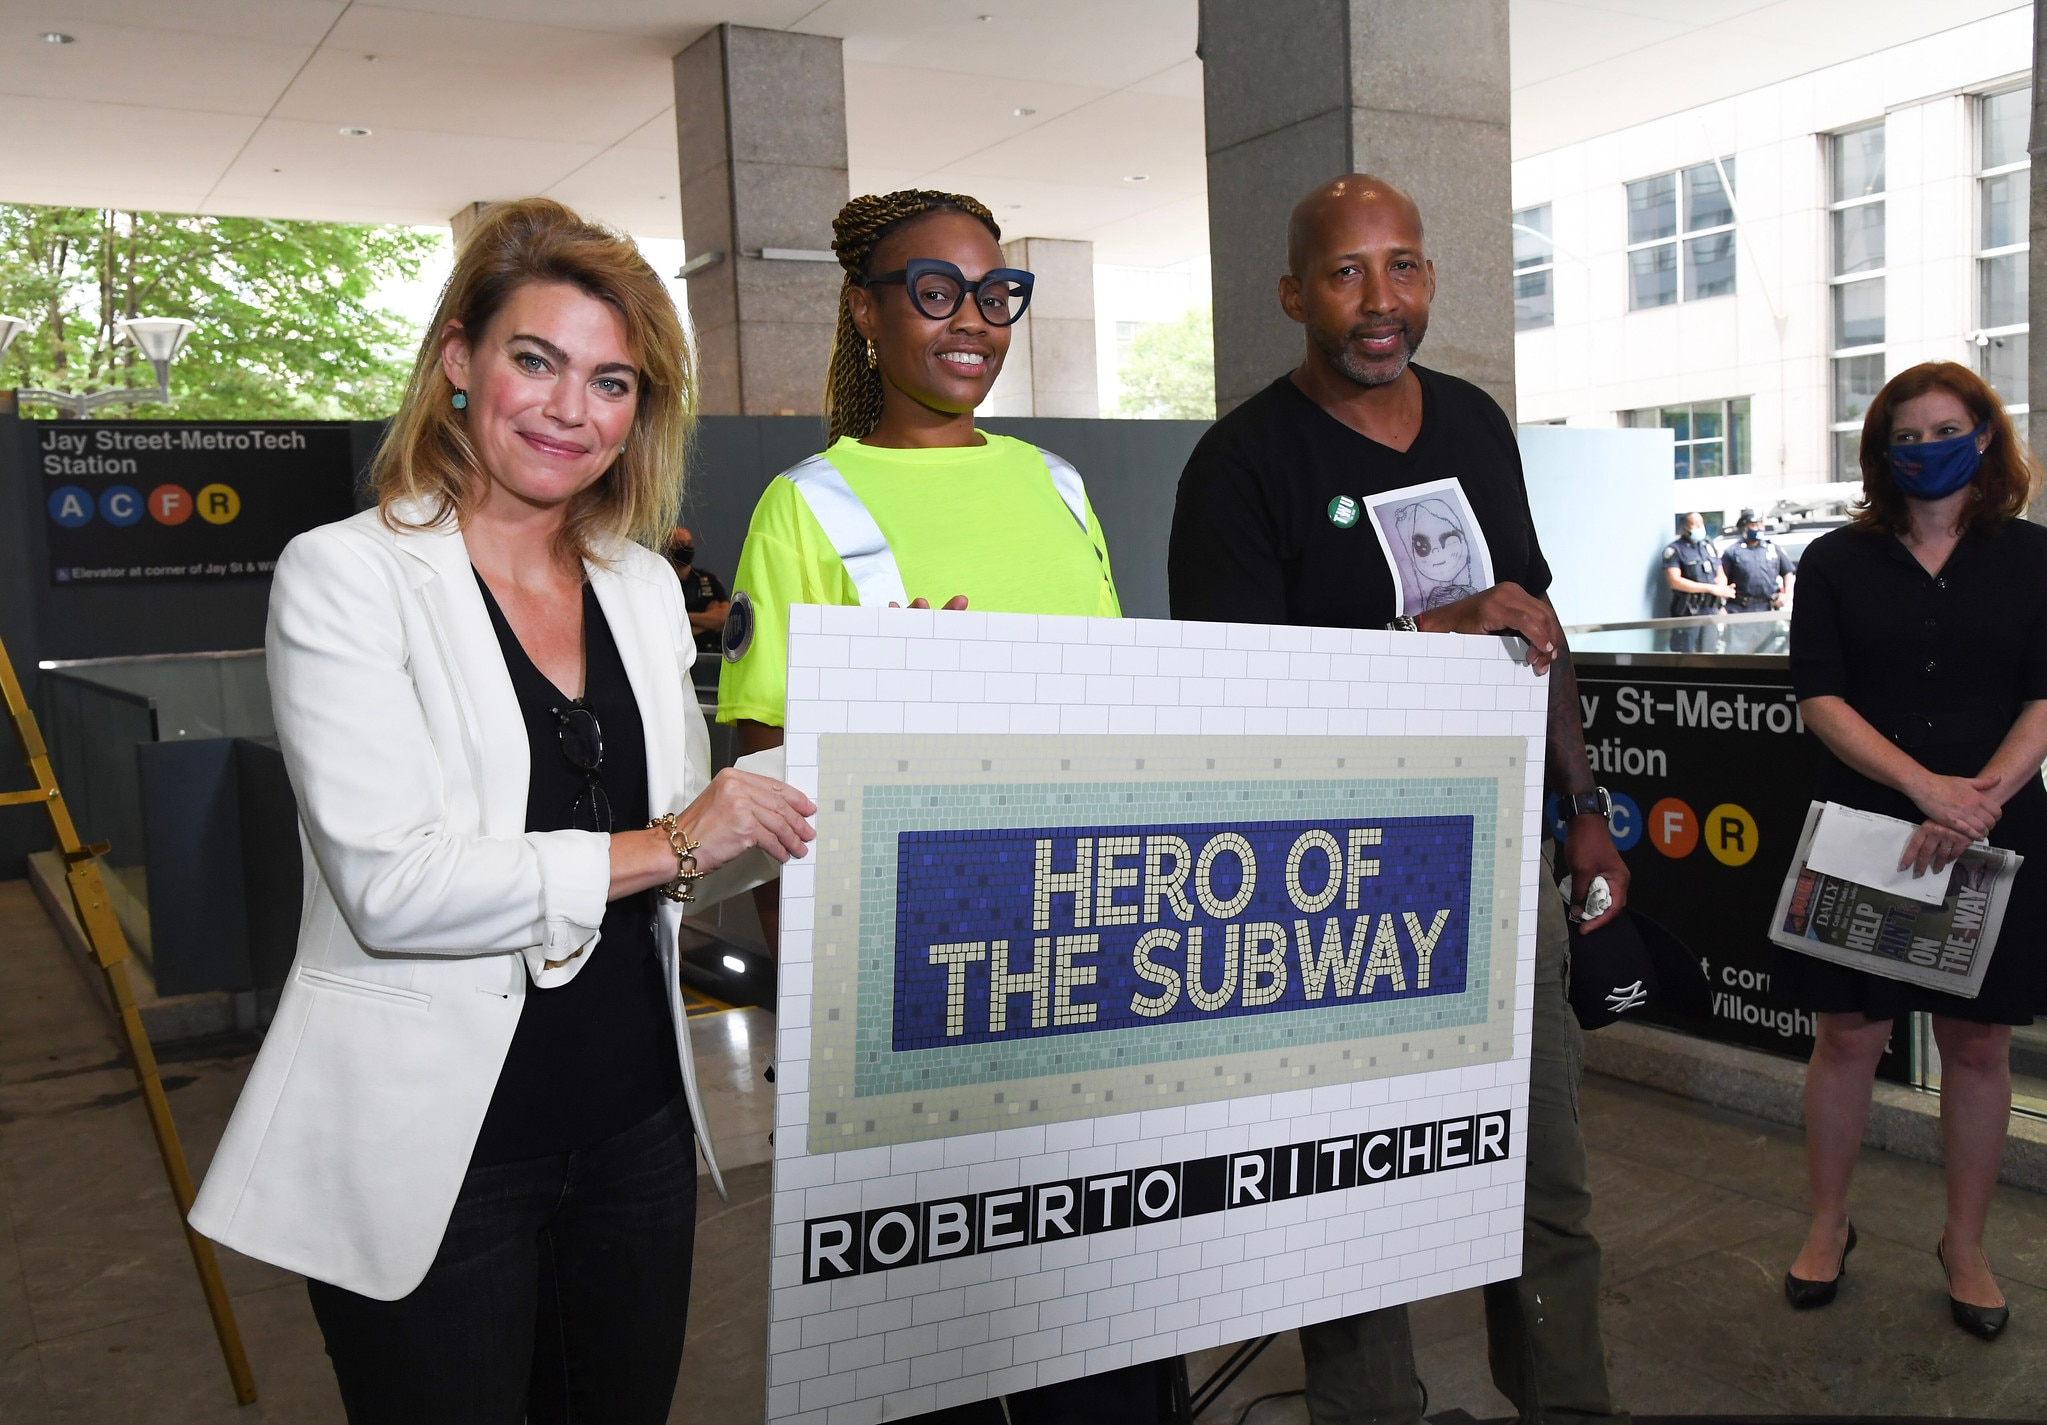 Heroic Transit Employees Commended for Saving Life of Customer at Brooklyn Subway Station